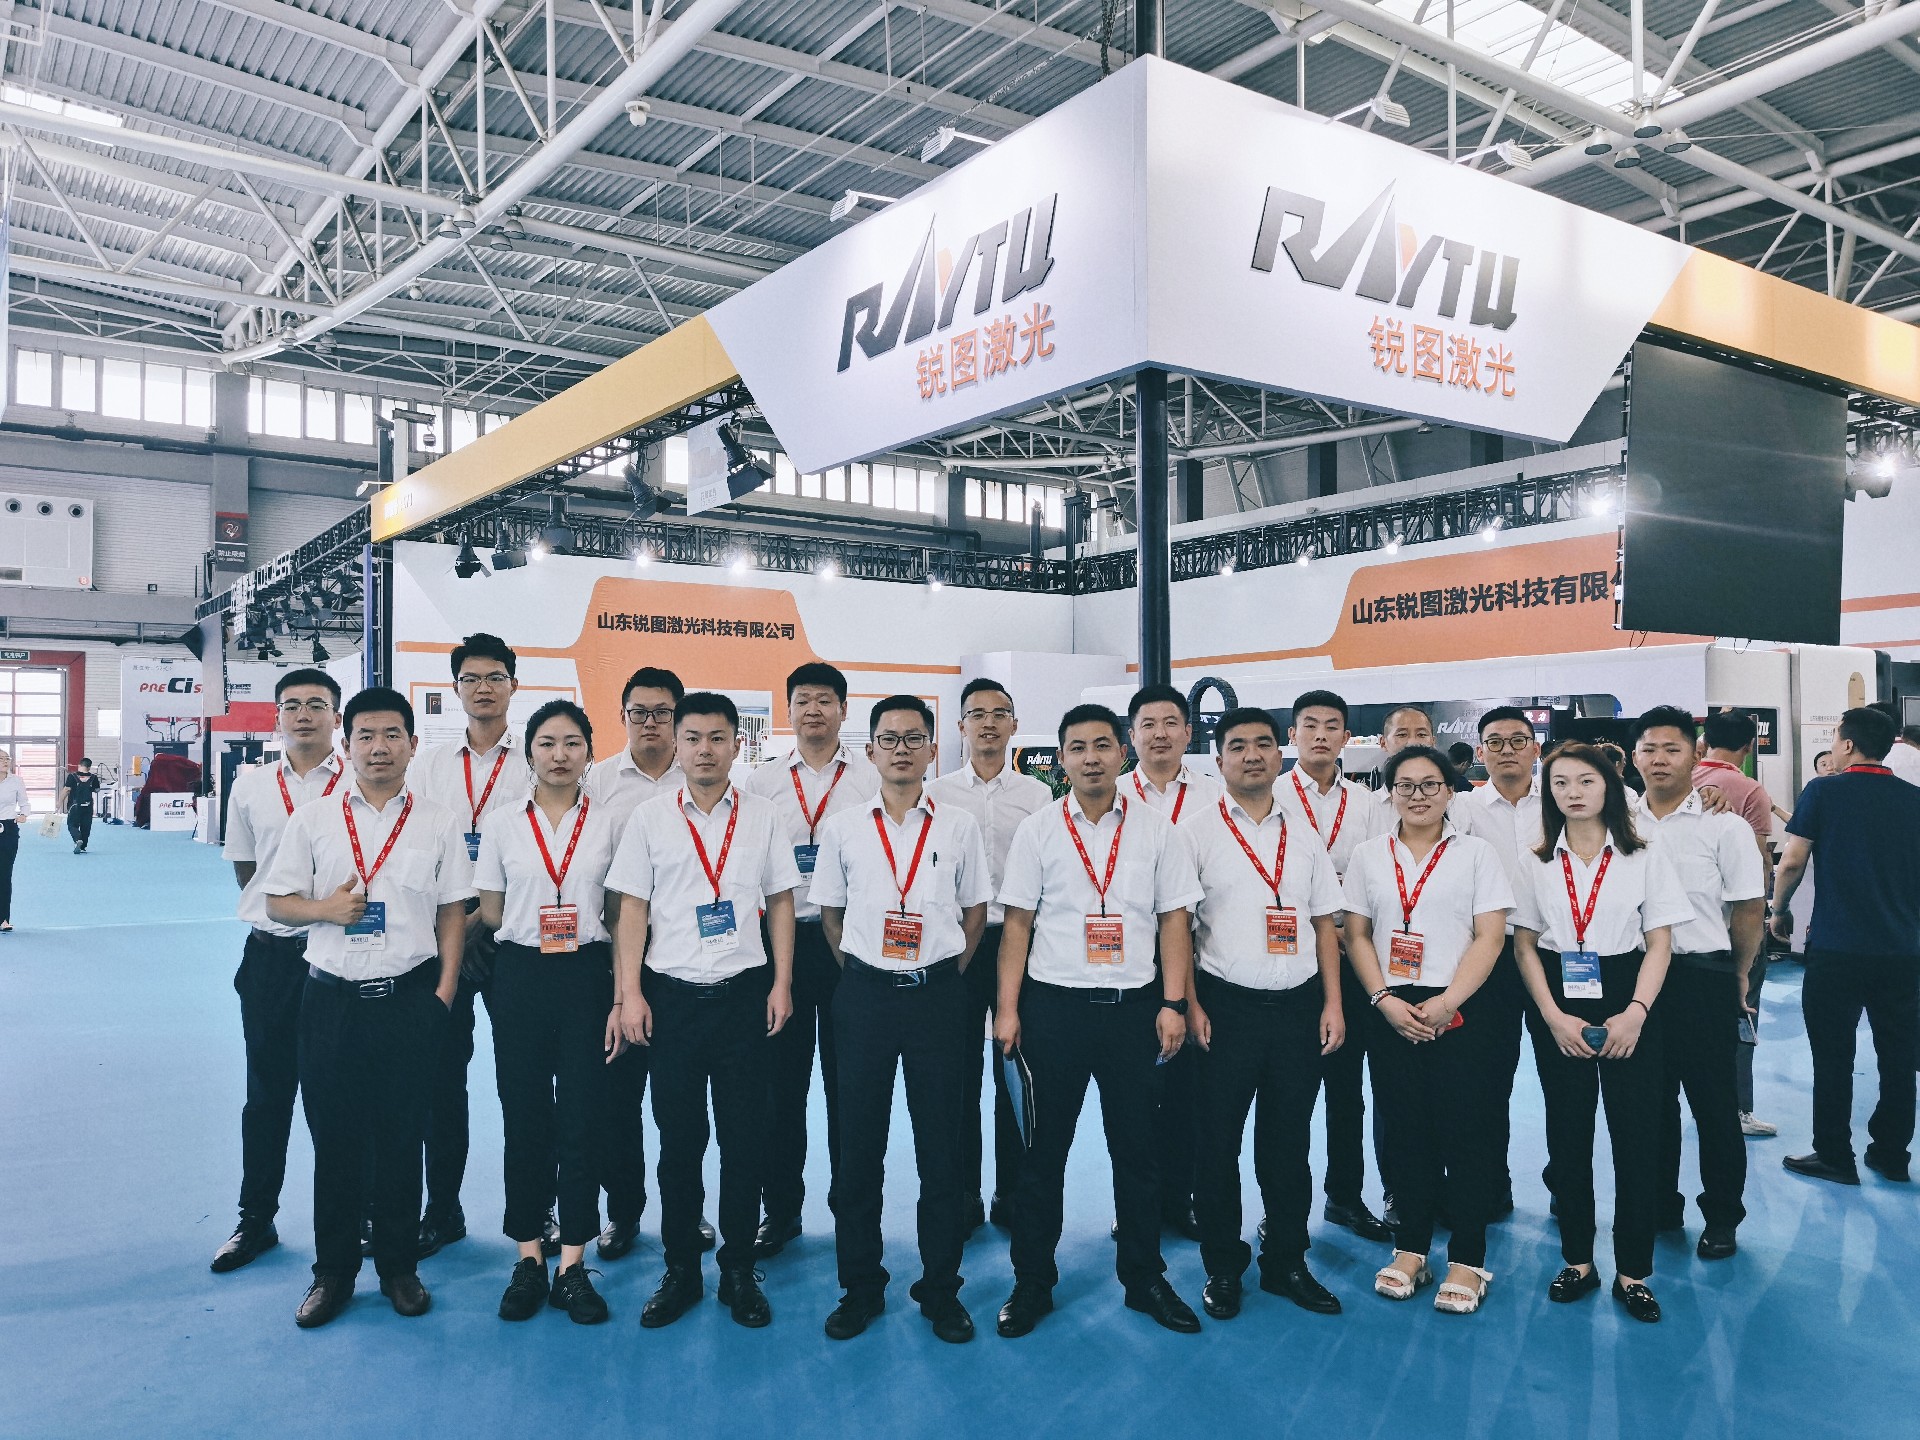 Raytu Laser was invited to participate in the 24th Qingdao International Machine Tool Exhibition